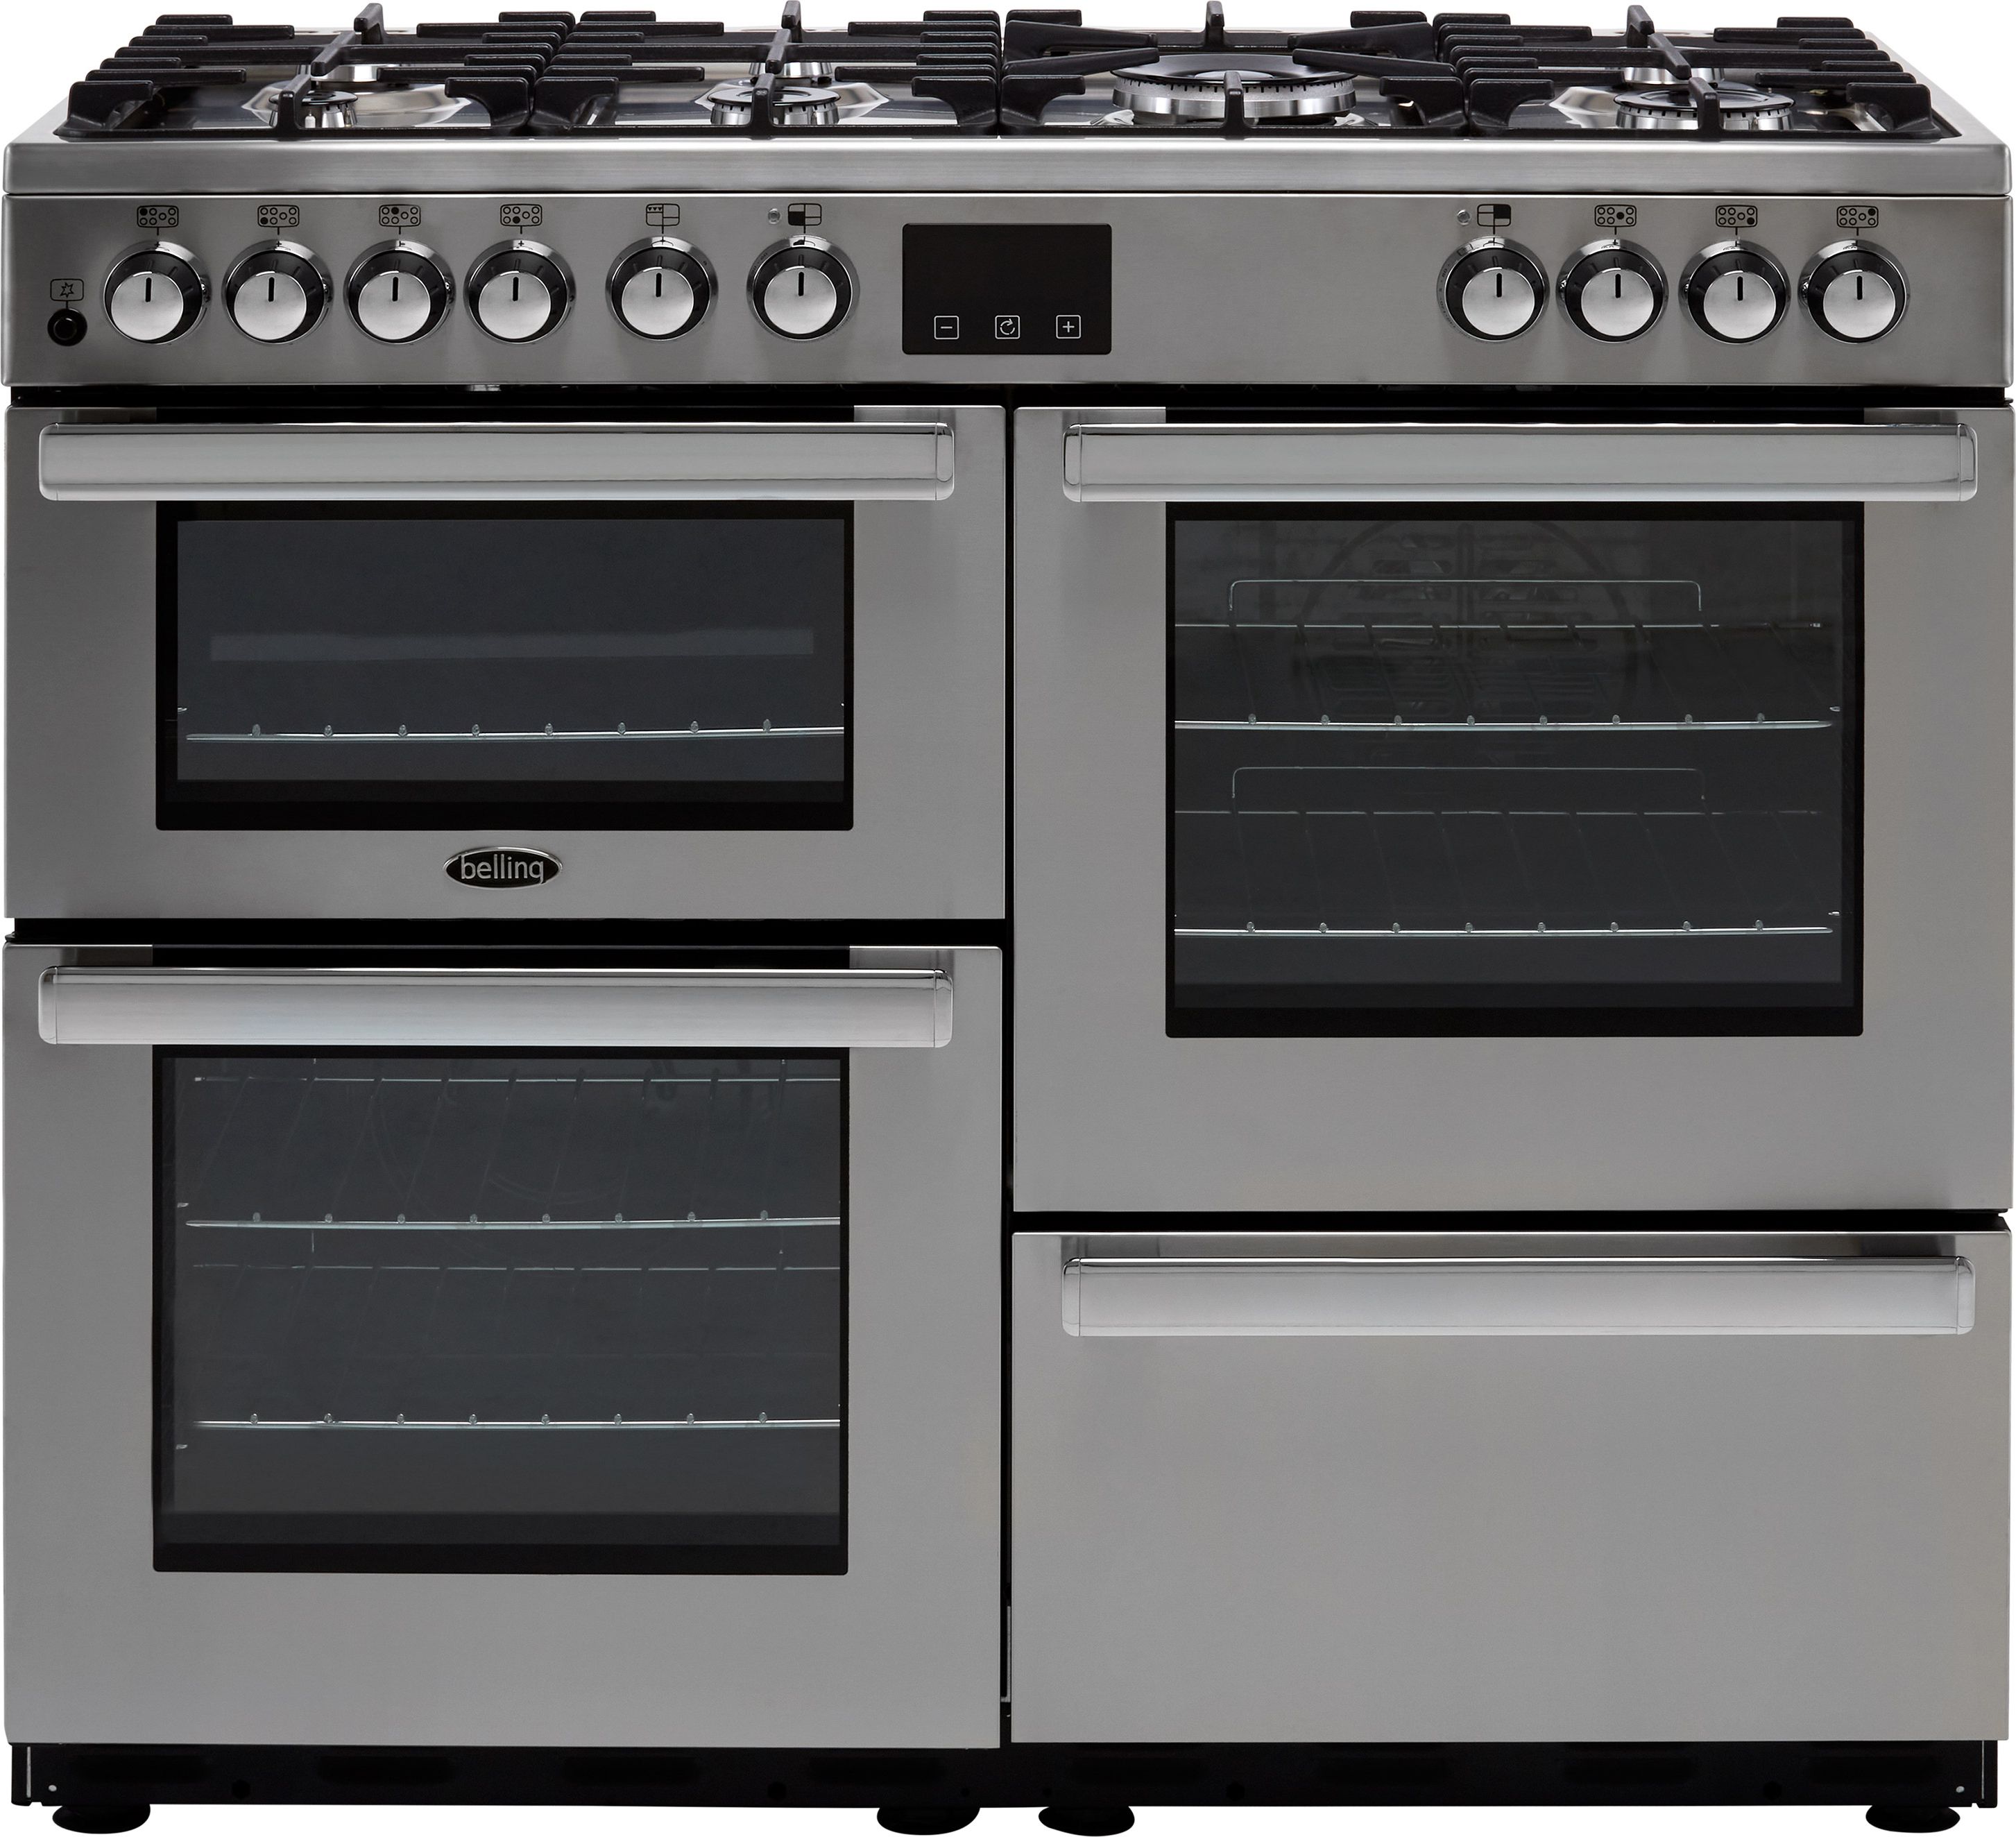 Belling Cookcentre100DFT Prof 100cm Dual Fuel Range Cooker - Stainless Steel - A/A Rated, Stainless Steel